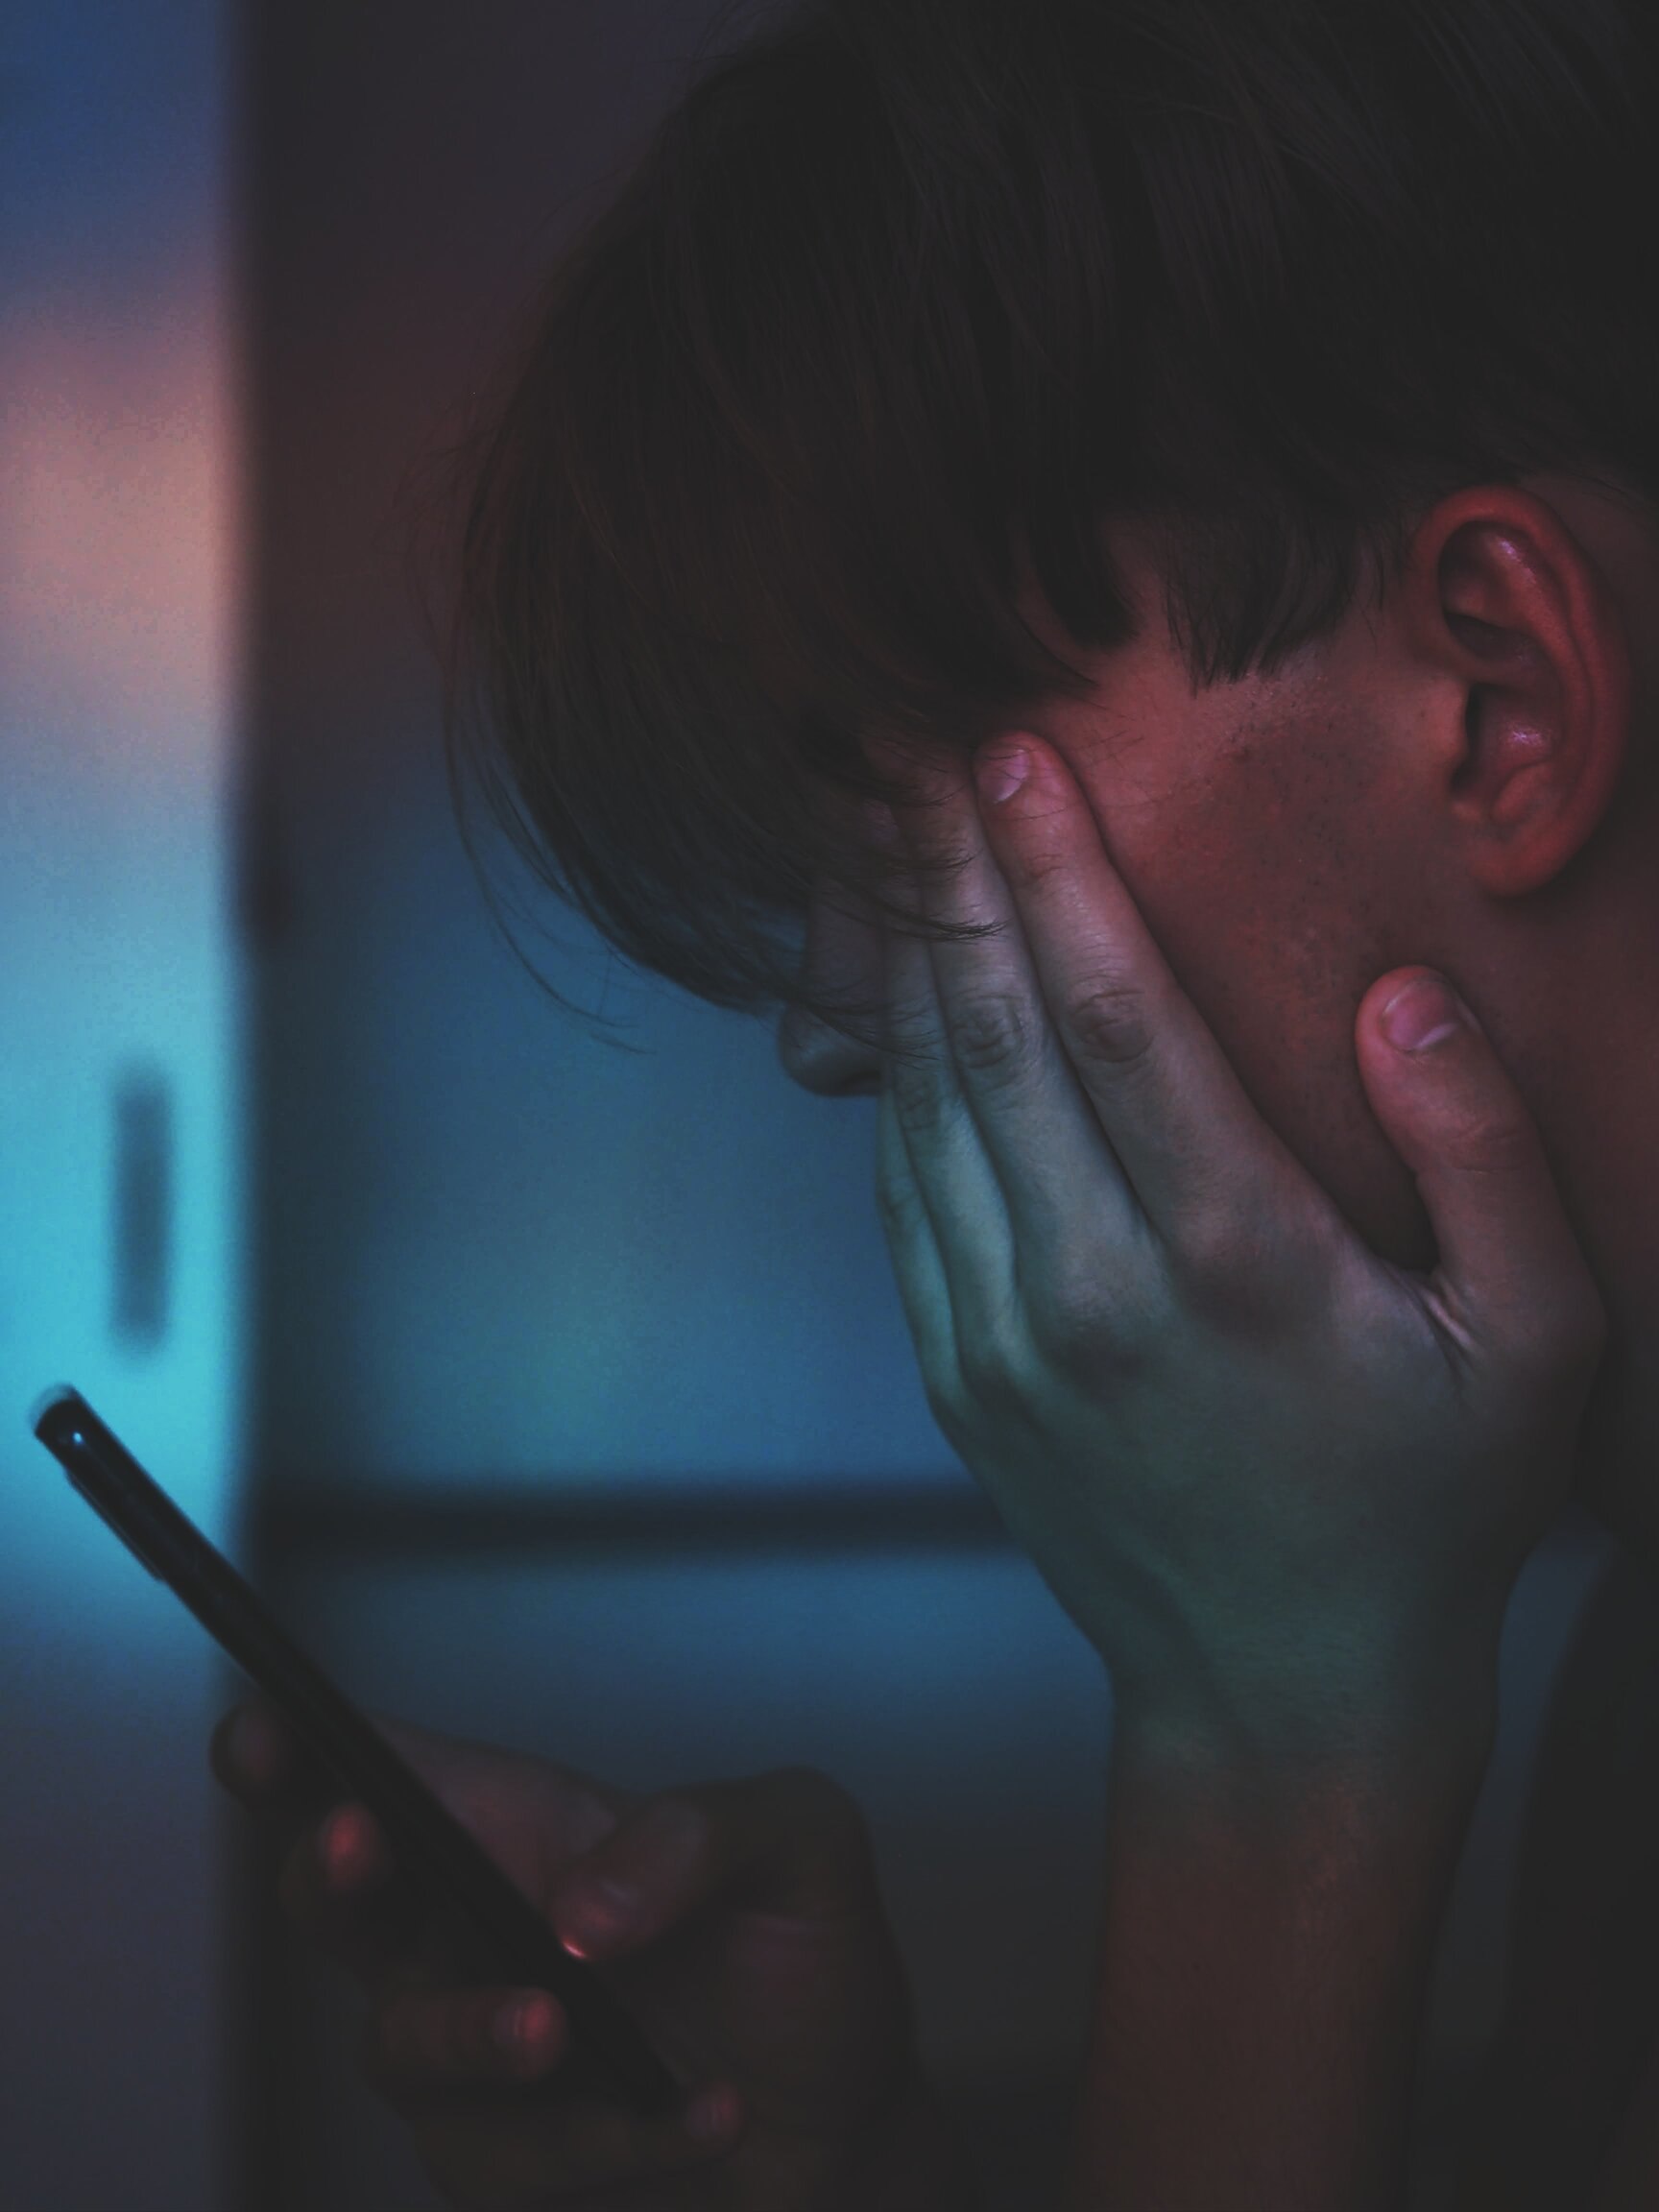 A young person with short hair that almost covers their eyes sits in a dark room looking at their phone, while holding their head